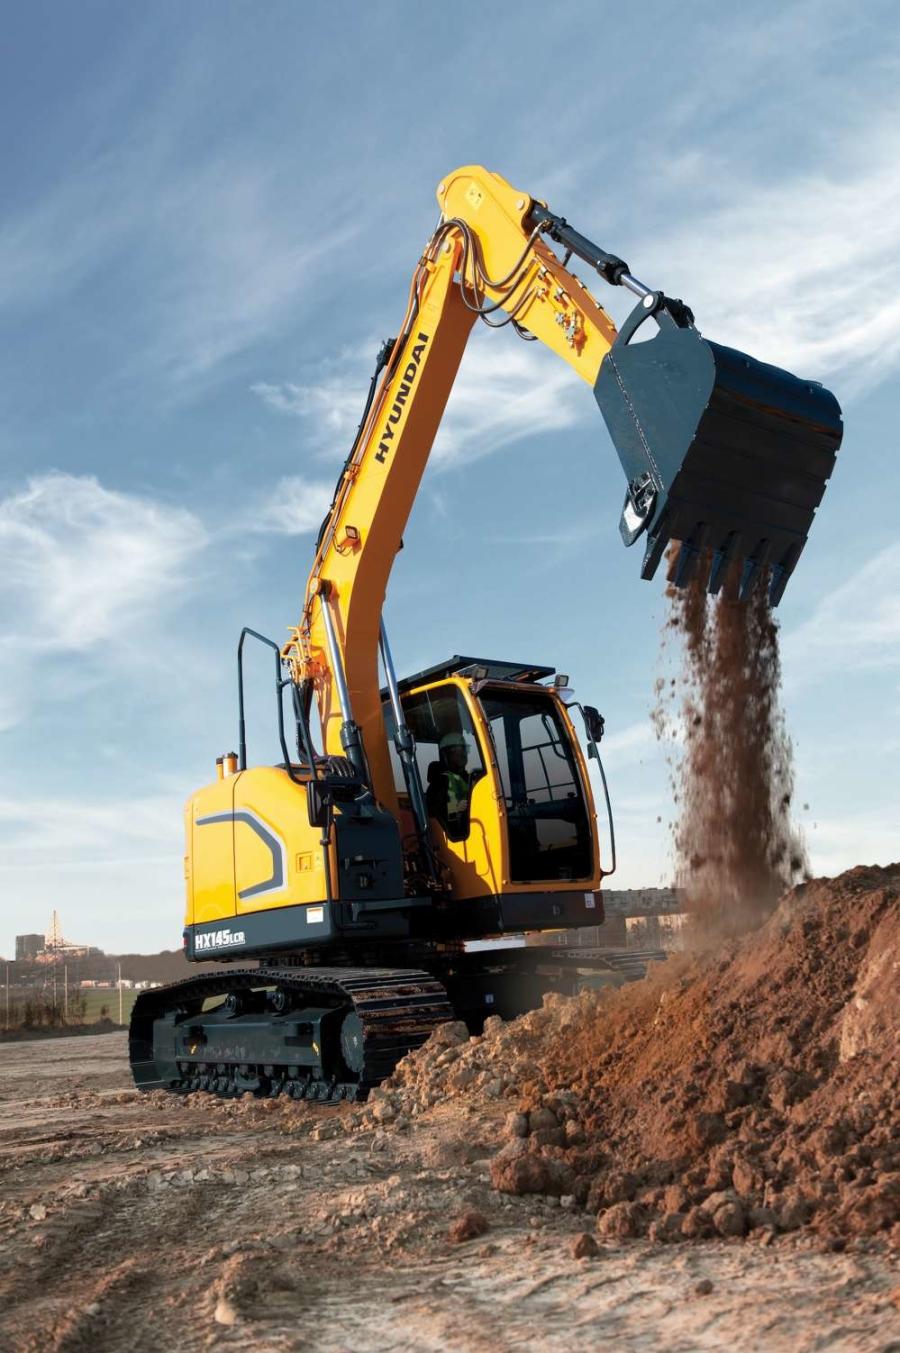 The 15.4 ton (14 t) HX145LCR compact radius excavator from Hyundai Construction Equipment Americas features new technologies that make the operating experience more comfortable, more ergonomic and more user-friendly.